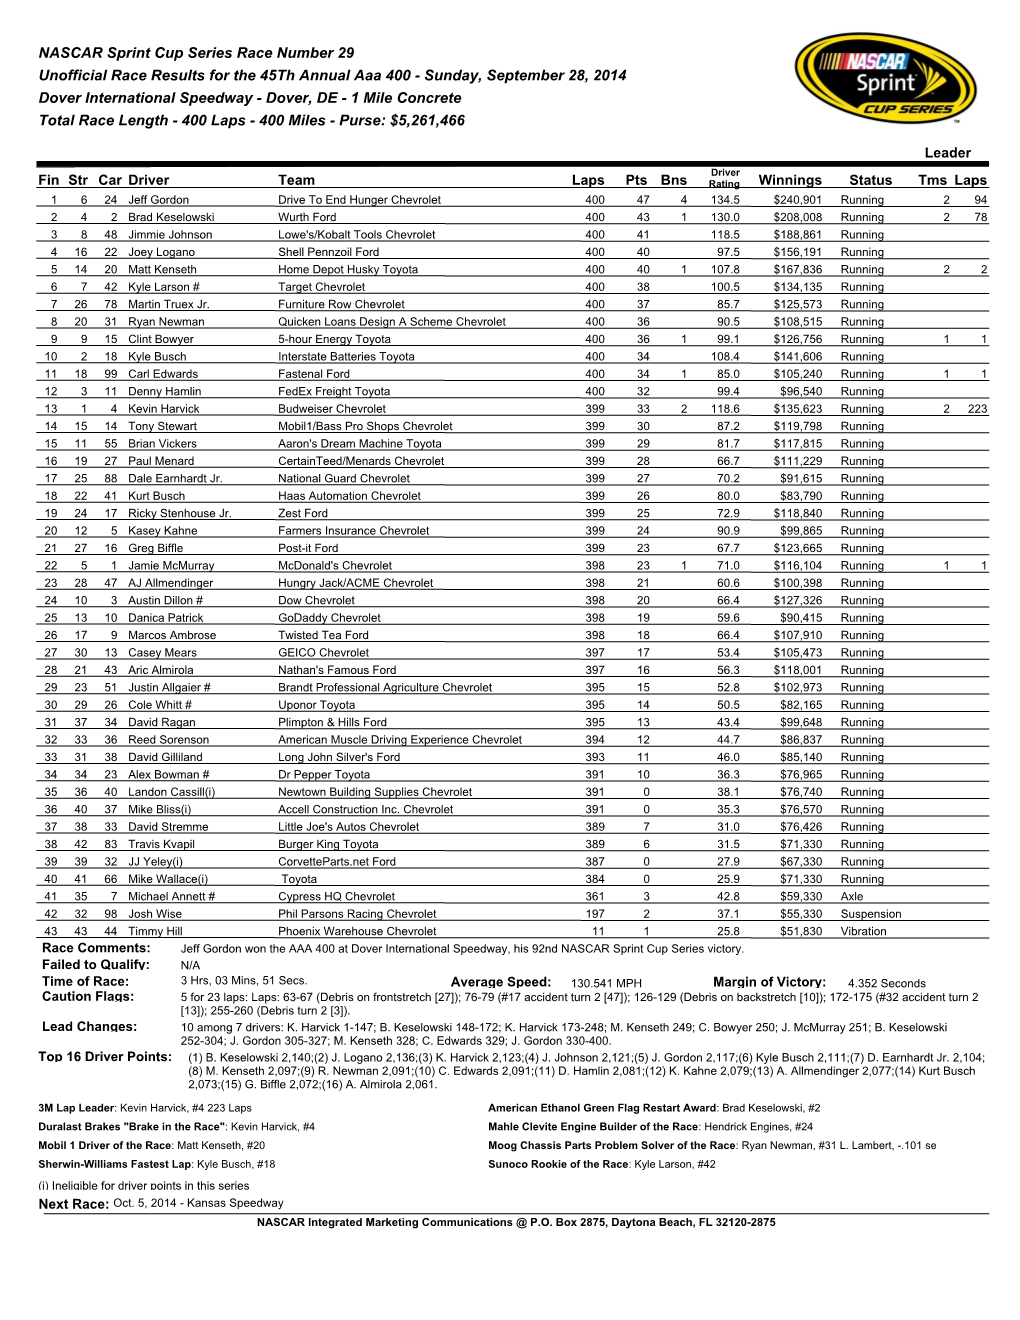 NASCAR Sprint Cup Series Race Number 29 Unofficial Race Results for the 45Th Annual Aaa